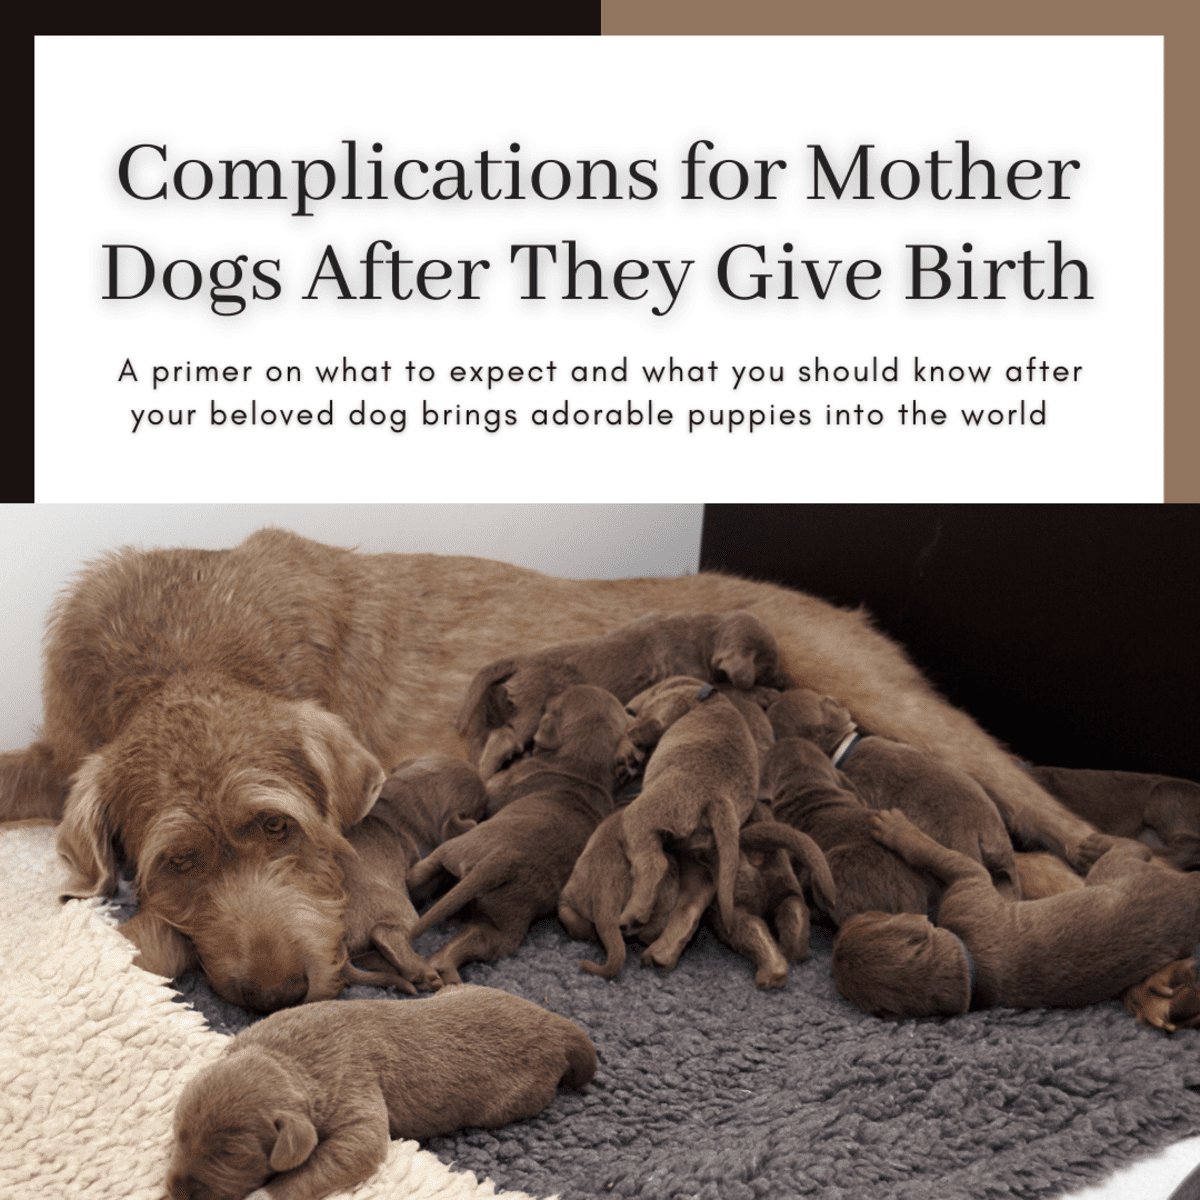 Complications After Dogs Give Birth - PetHelpful